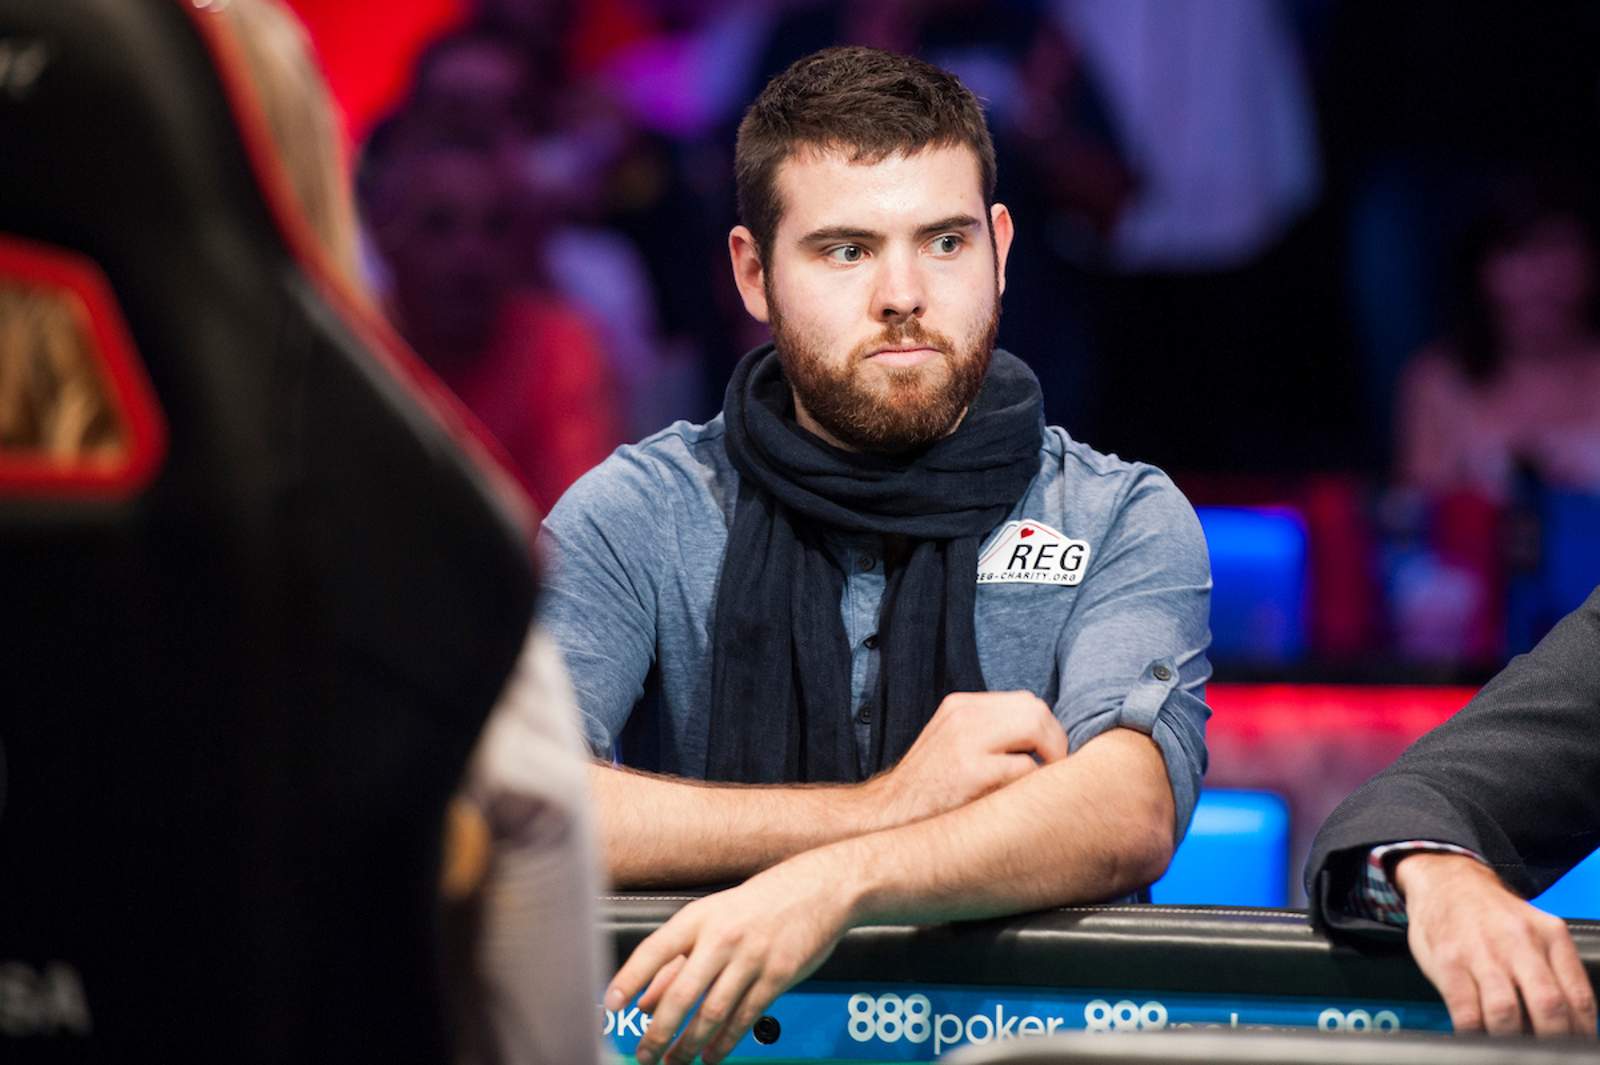 WSOP Main Event: Jack Sinclair Eliminated in 8th Place